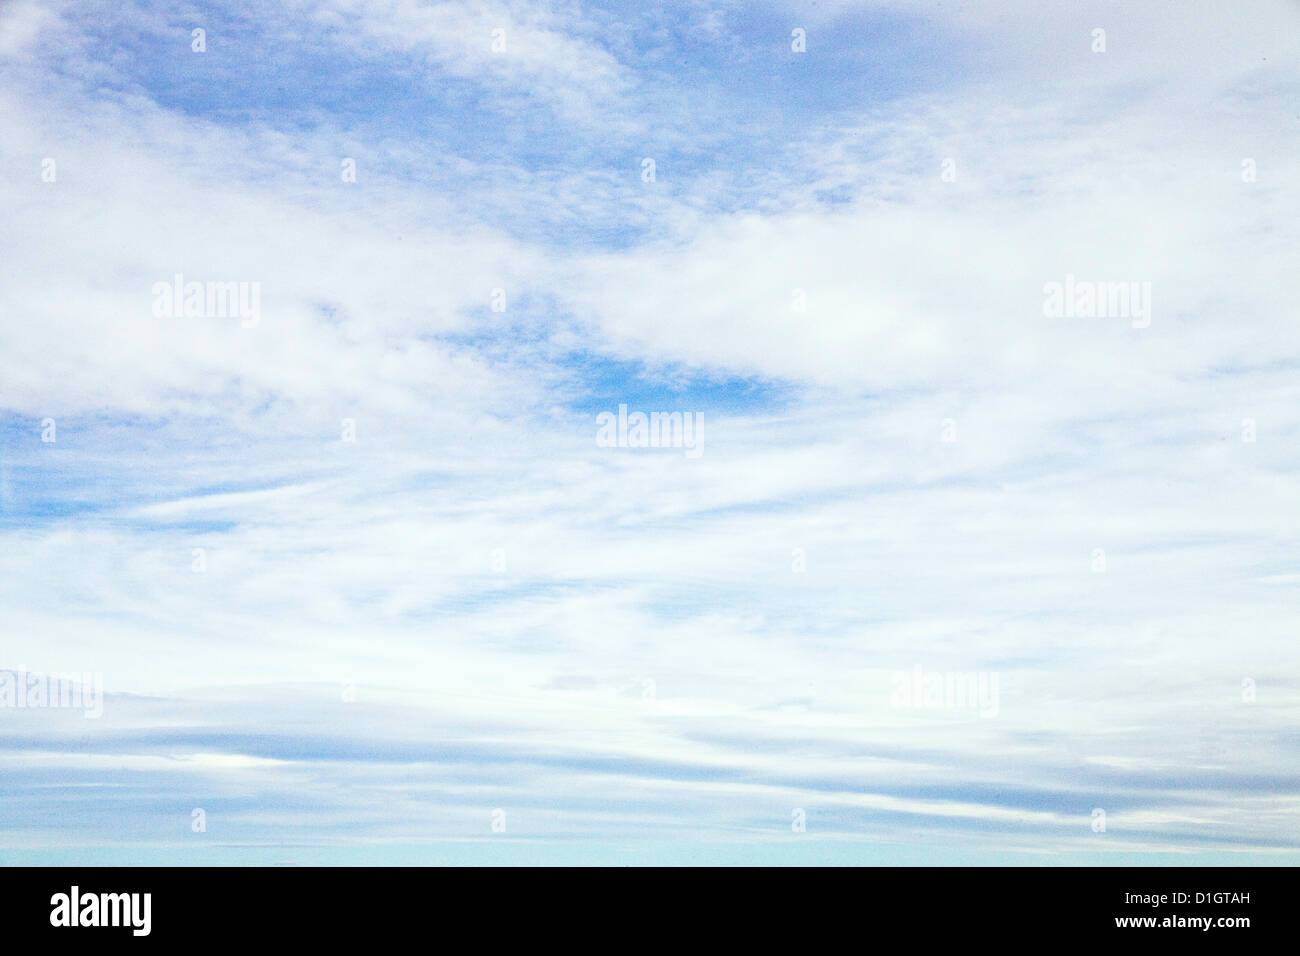 whispy white clouds in motion, blue sky Stock Photo